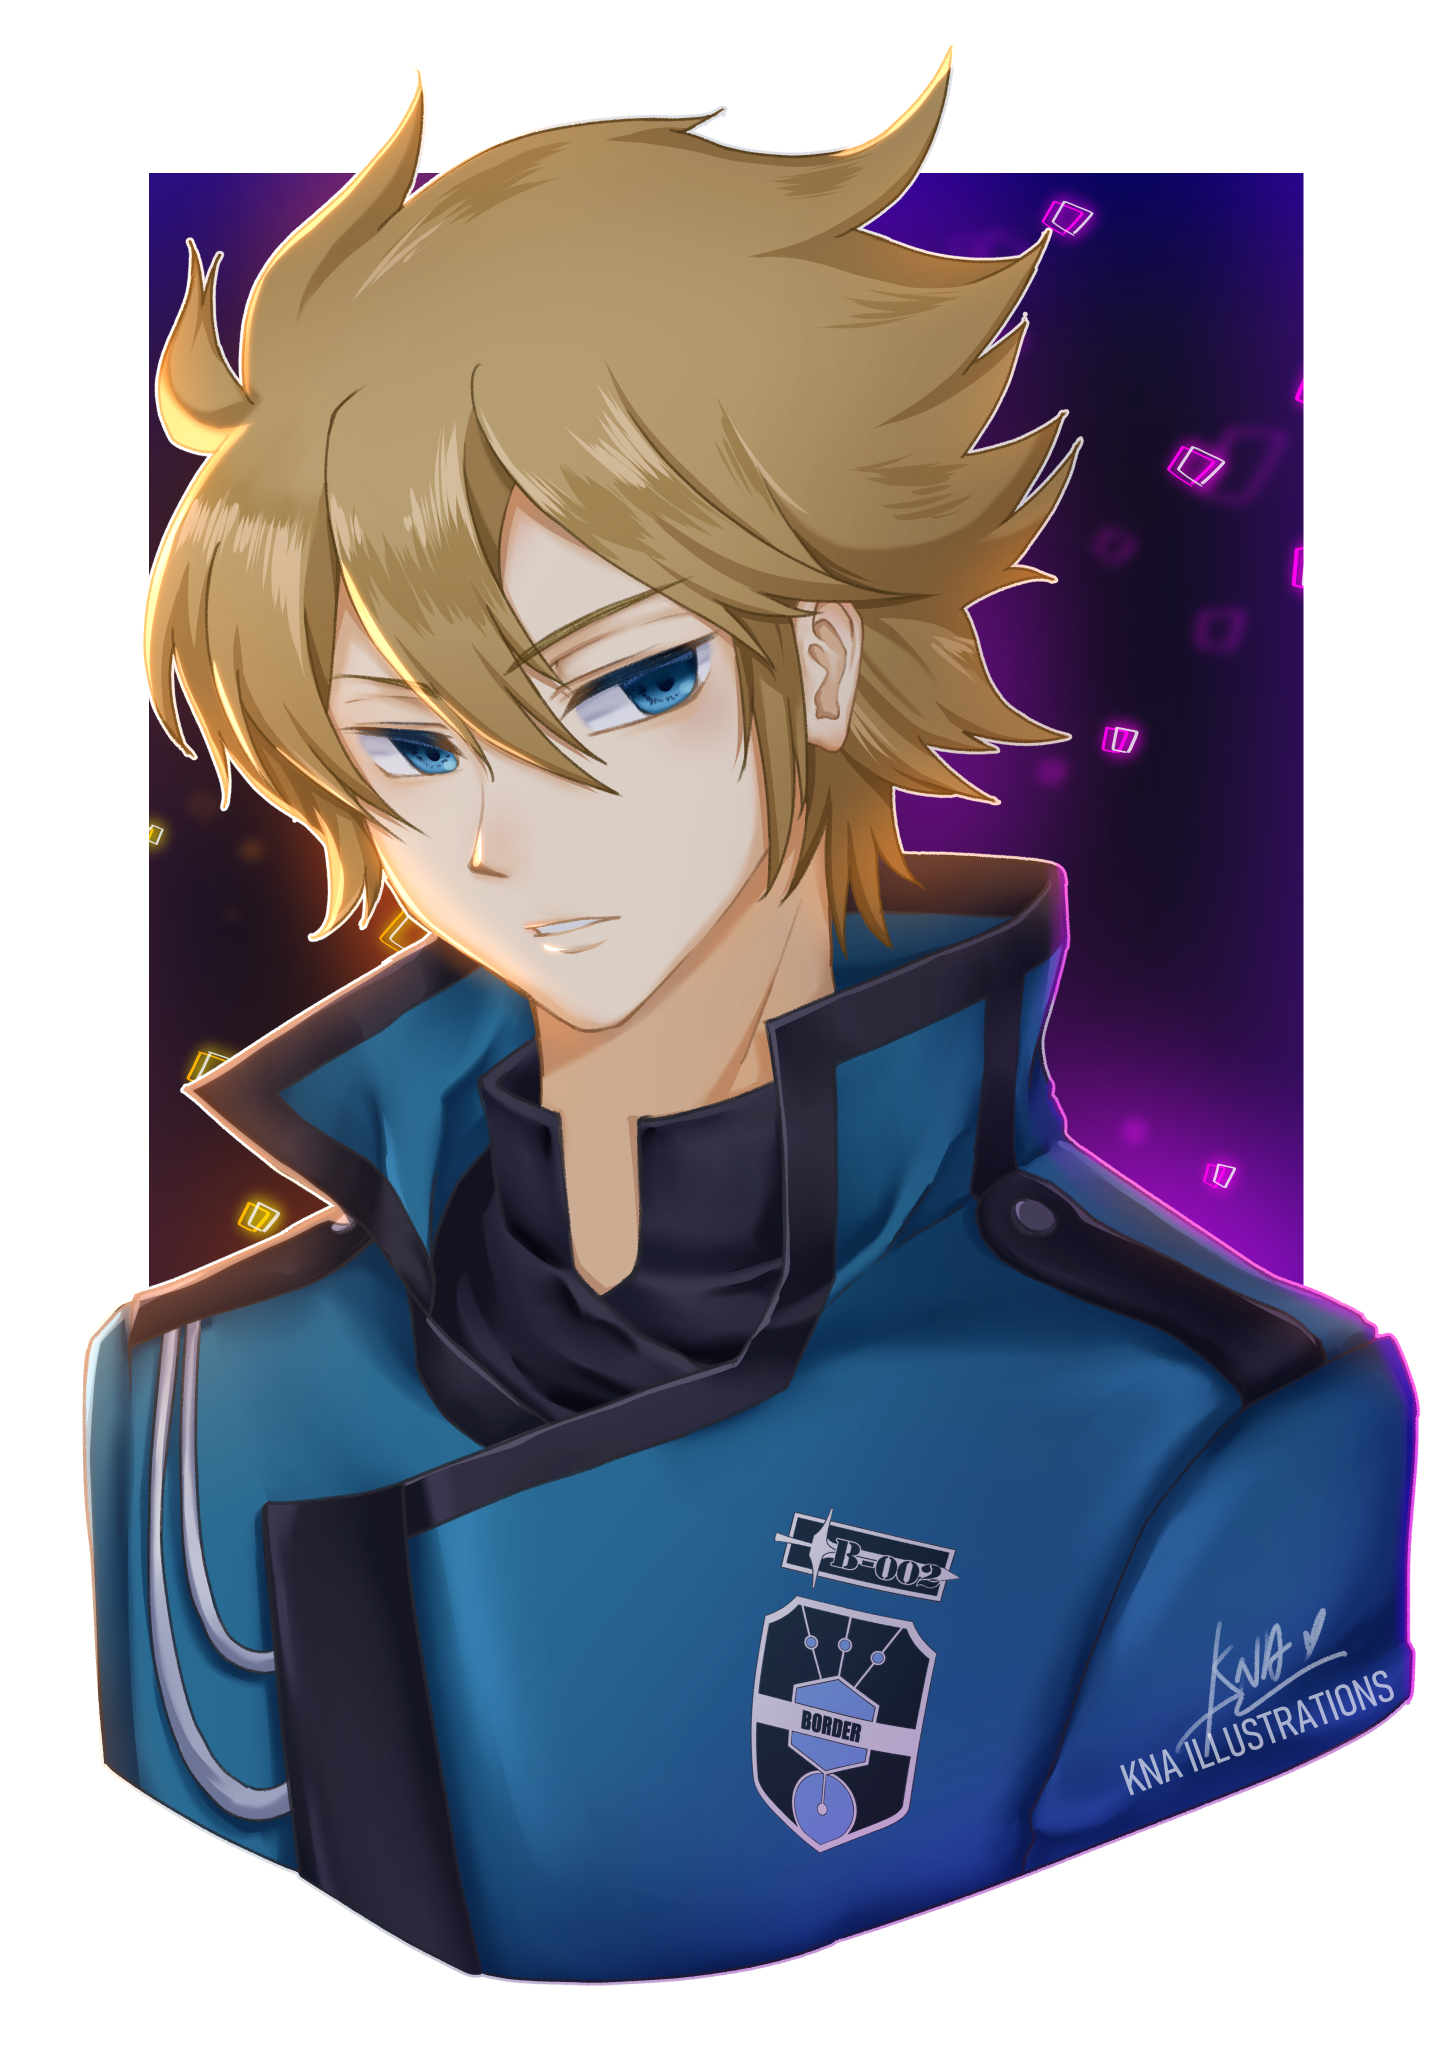 Kna Hyuse First Illust Post For The Year 22 One Of My Favs From World Trigger Hyuse Worldtrigger Illustration Anime Manga ヒュース ワールドトリガー イラスト Tamakoma 玉狛支部 Drawing Clipstudiopaint T Co